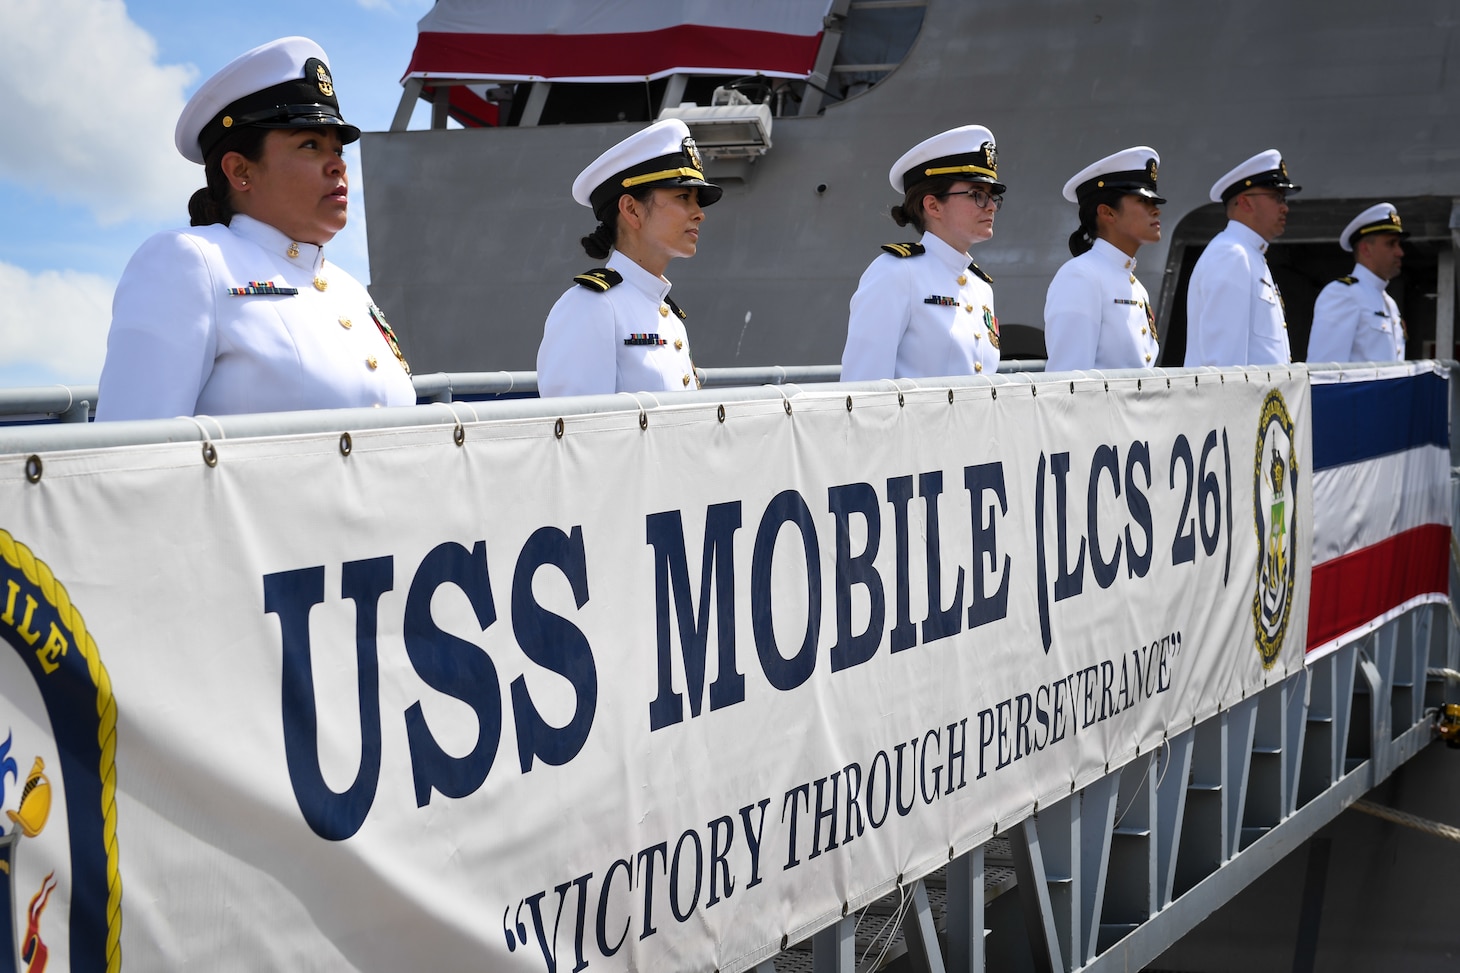 he crew of USS Mobile (LCS 26), man the ship during the commissioning ceremony of Mobile. Mobile is the Navy’s 13th Independence-variant littoral combat ship.